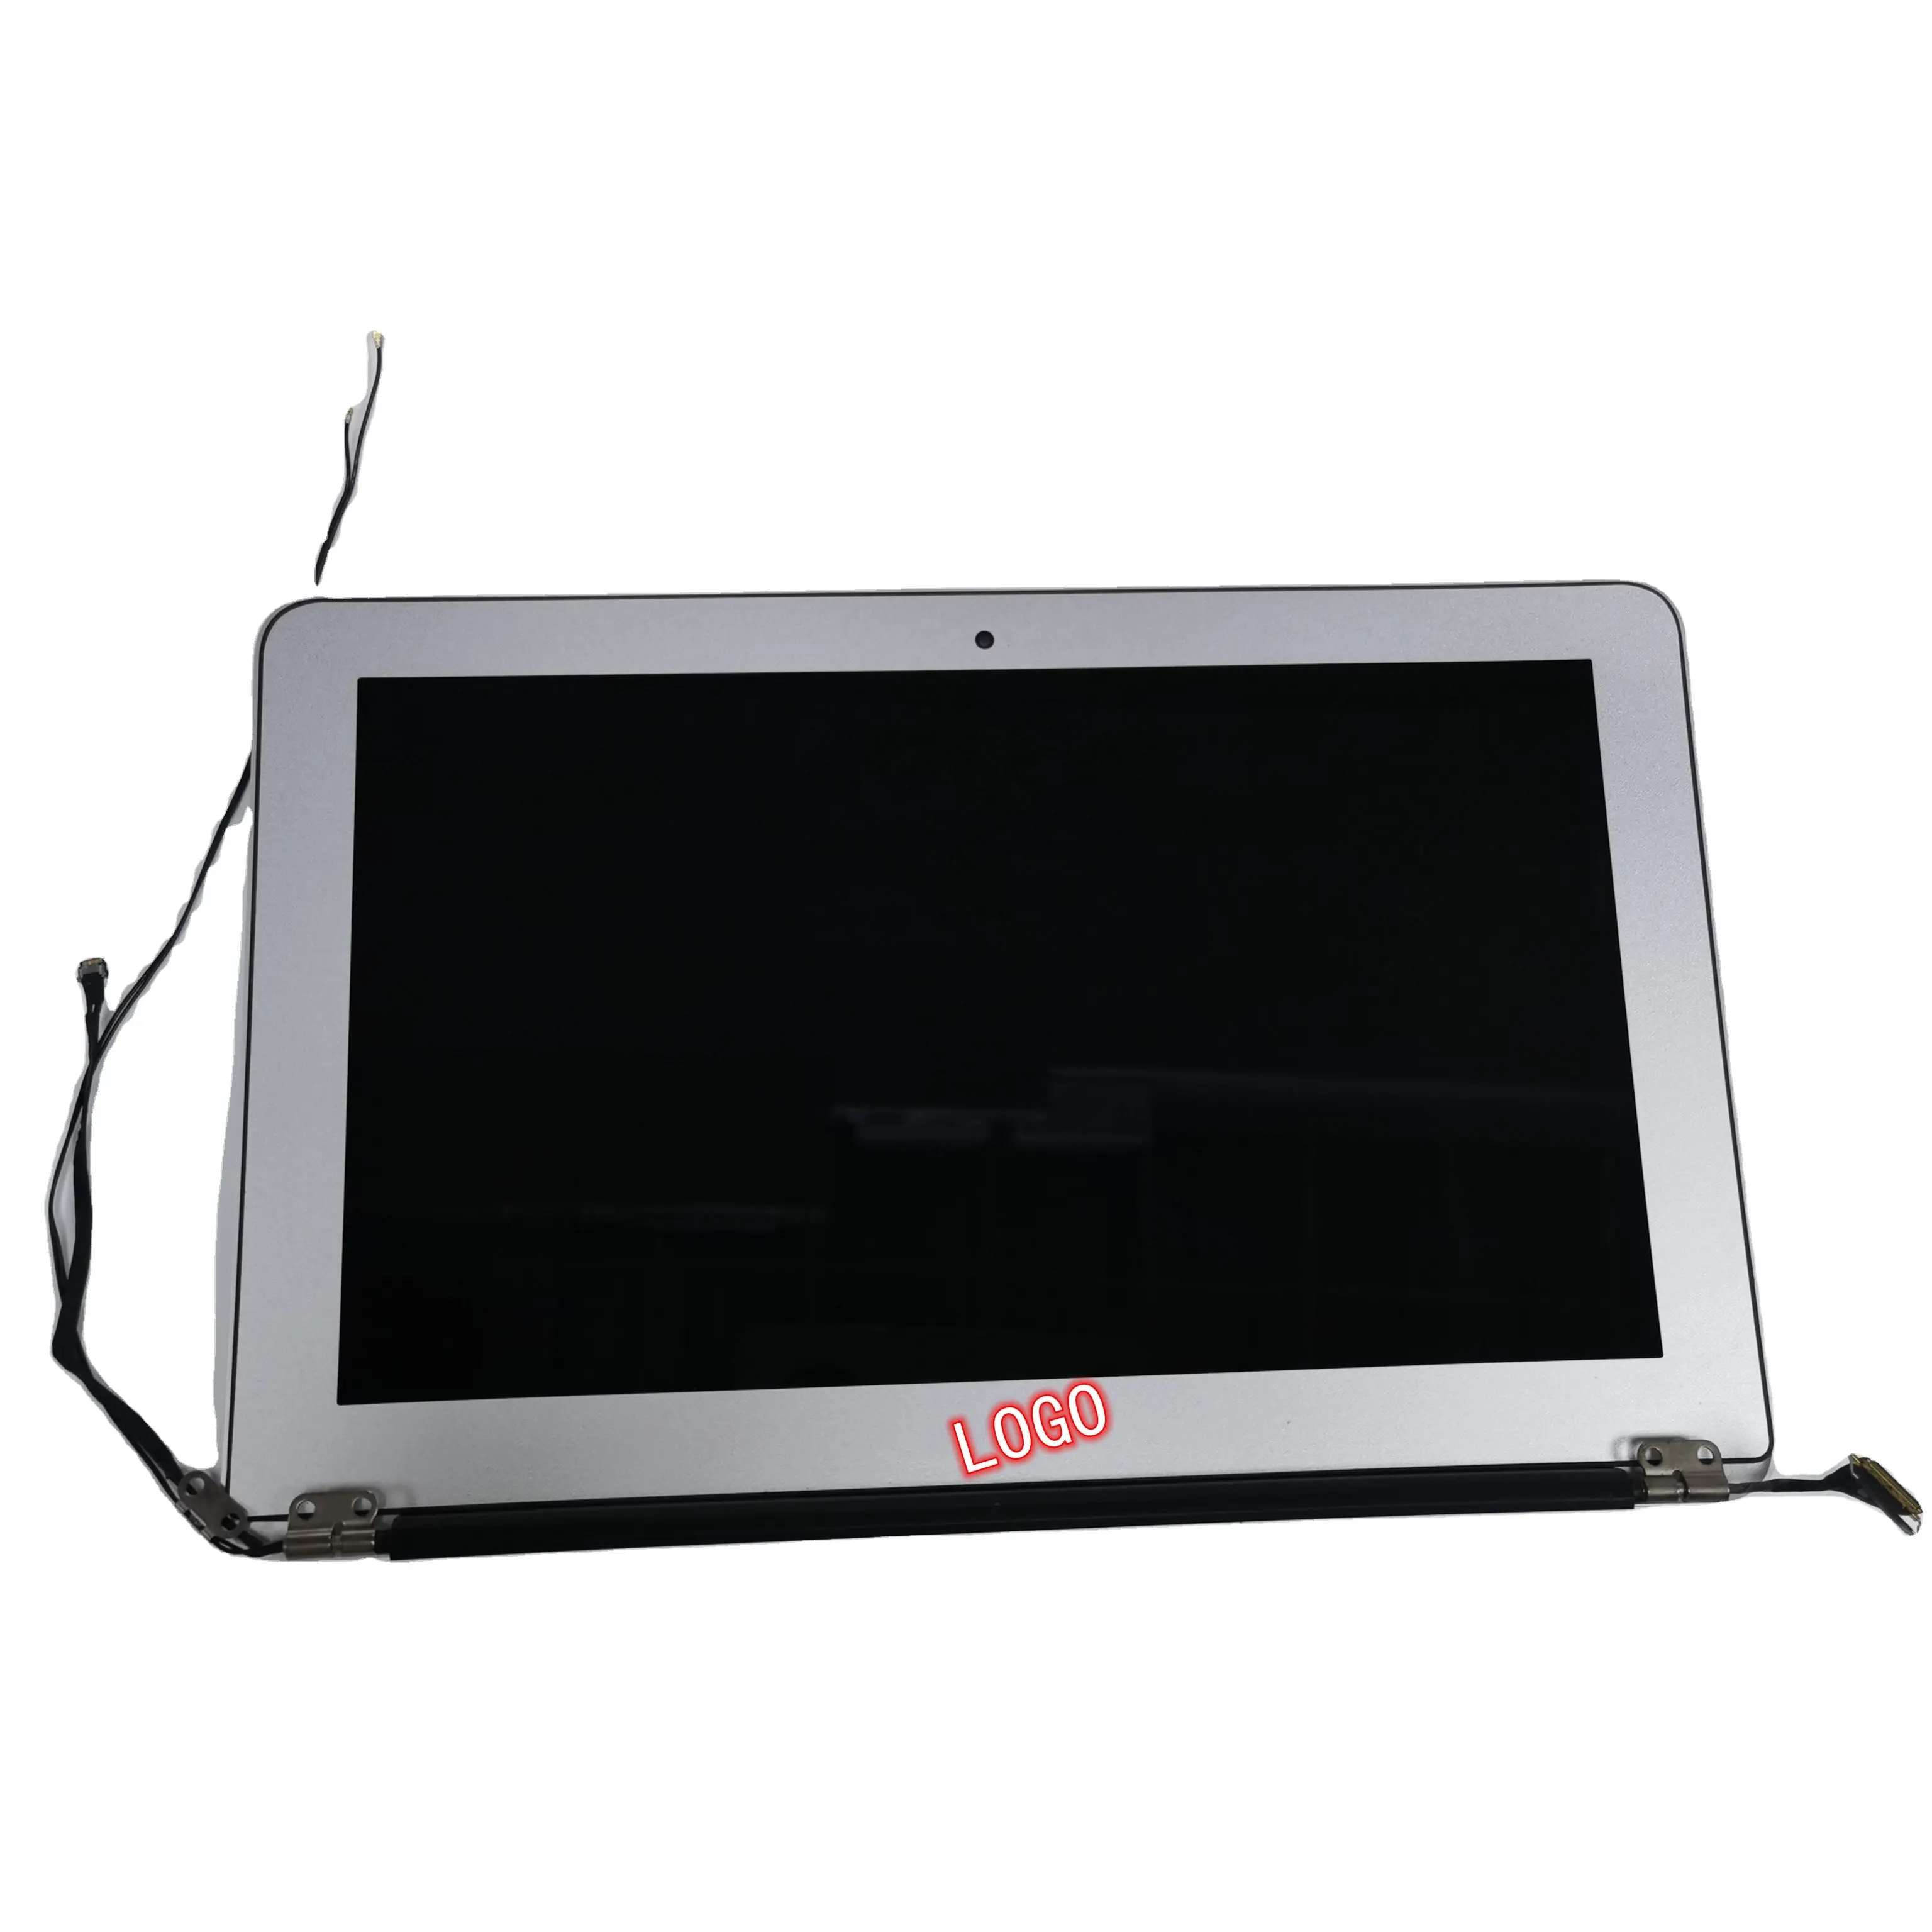 A1465 A1370 Screen Display For Macbook Air 11.6 inch Computer Replacement LED LCD Monitor